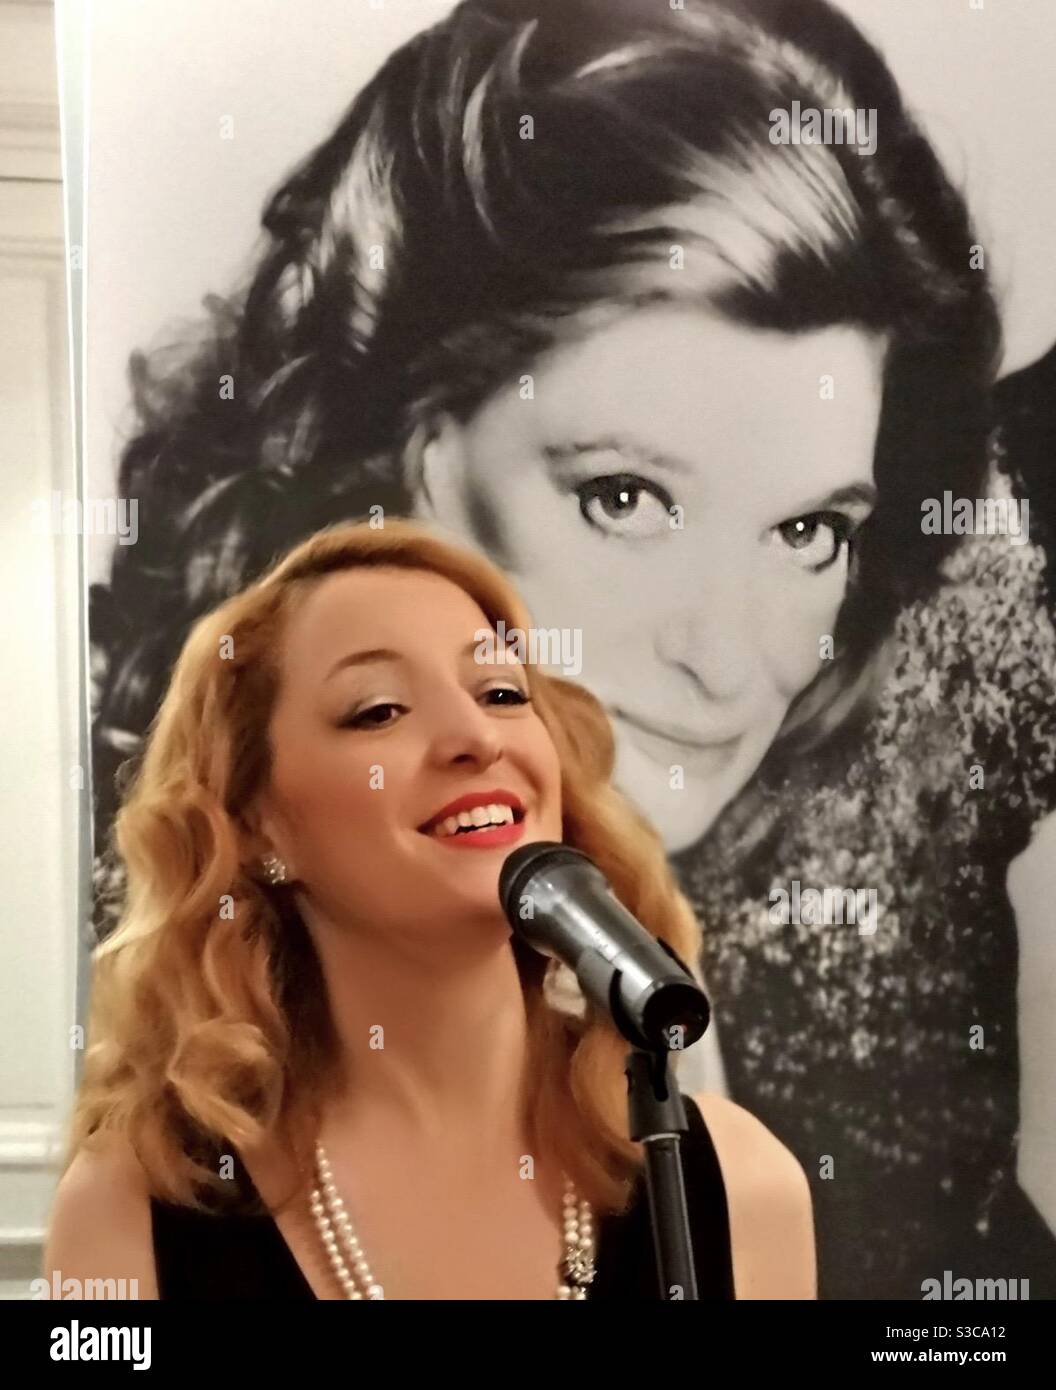 Noted Greek singer Tina Alexopoulou in Paris, in her acclaimed tribute performance to Melina Mercuri, the famous Greek actress, singer, film star & politician. Tina has performed this in 3 countries. Stock Photo